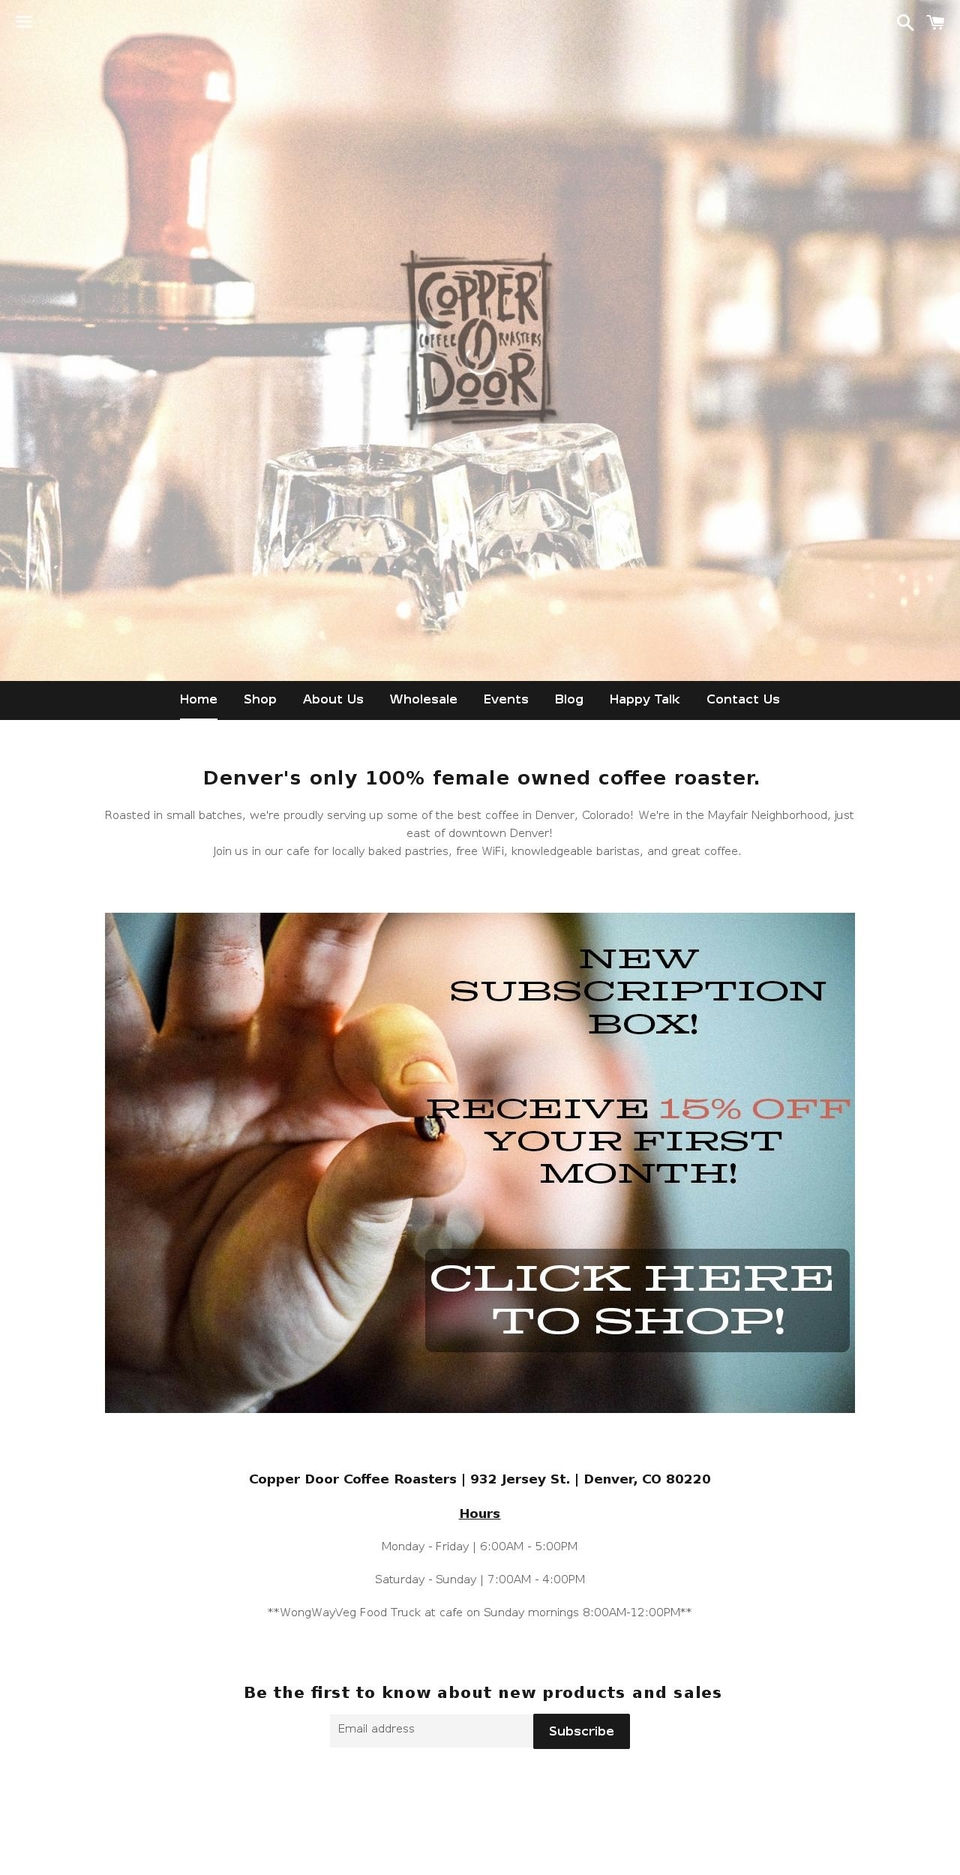 Coffee Shopify theme site example copperdoorcoffee.com